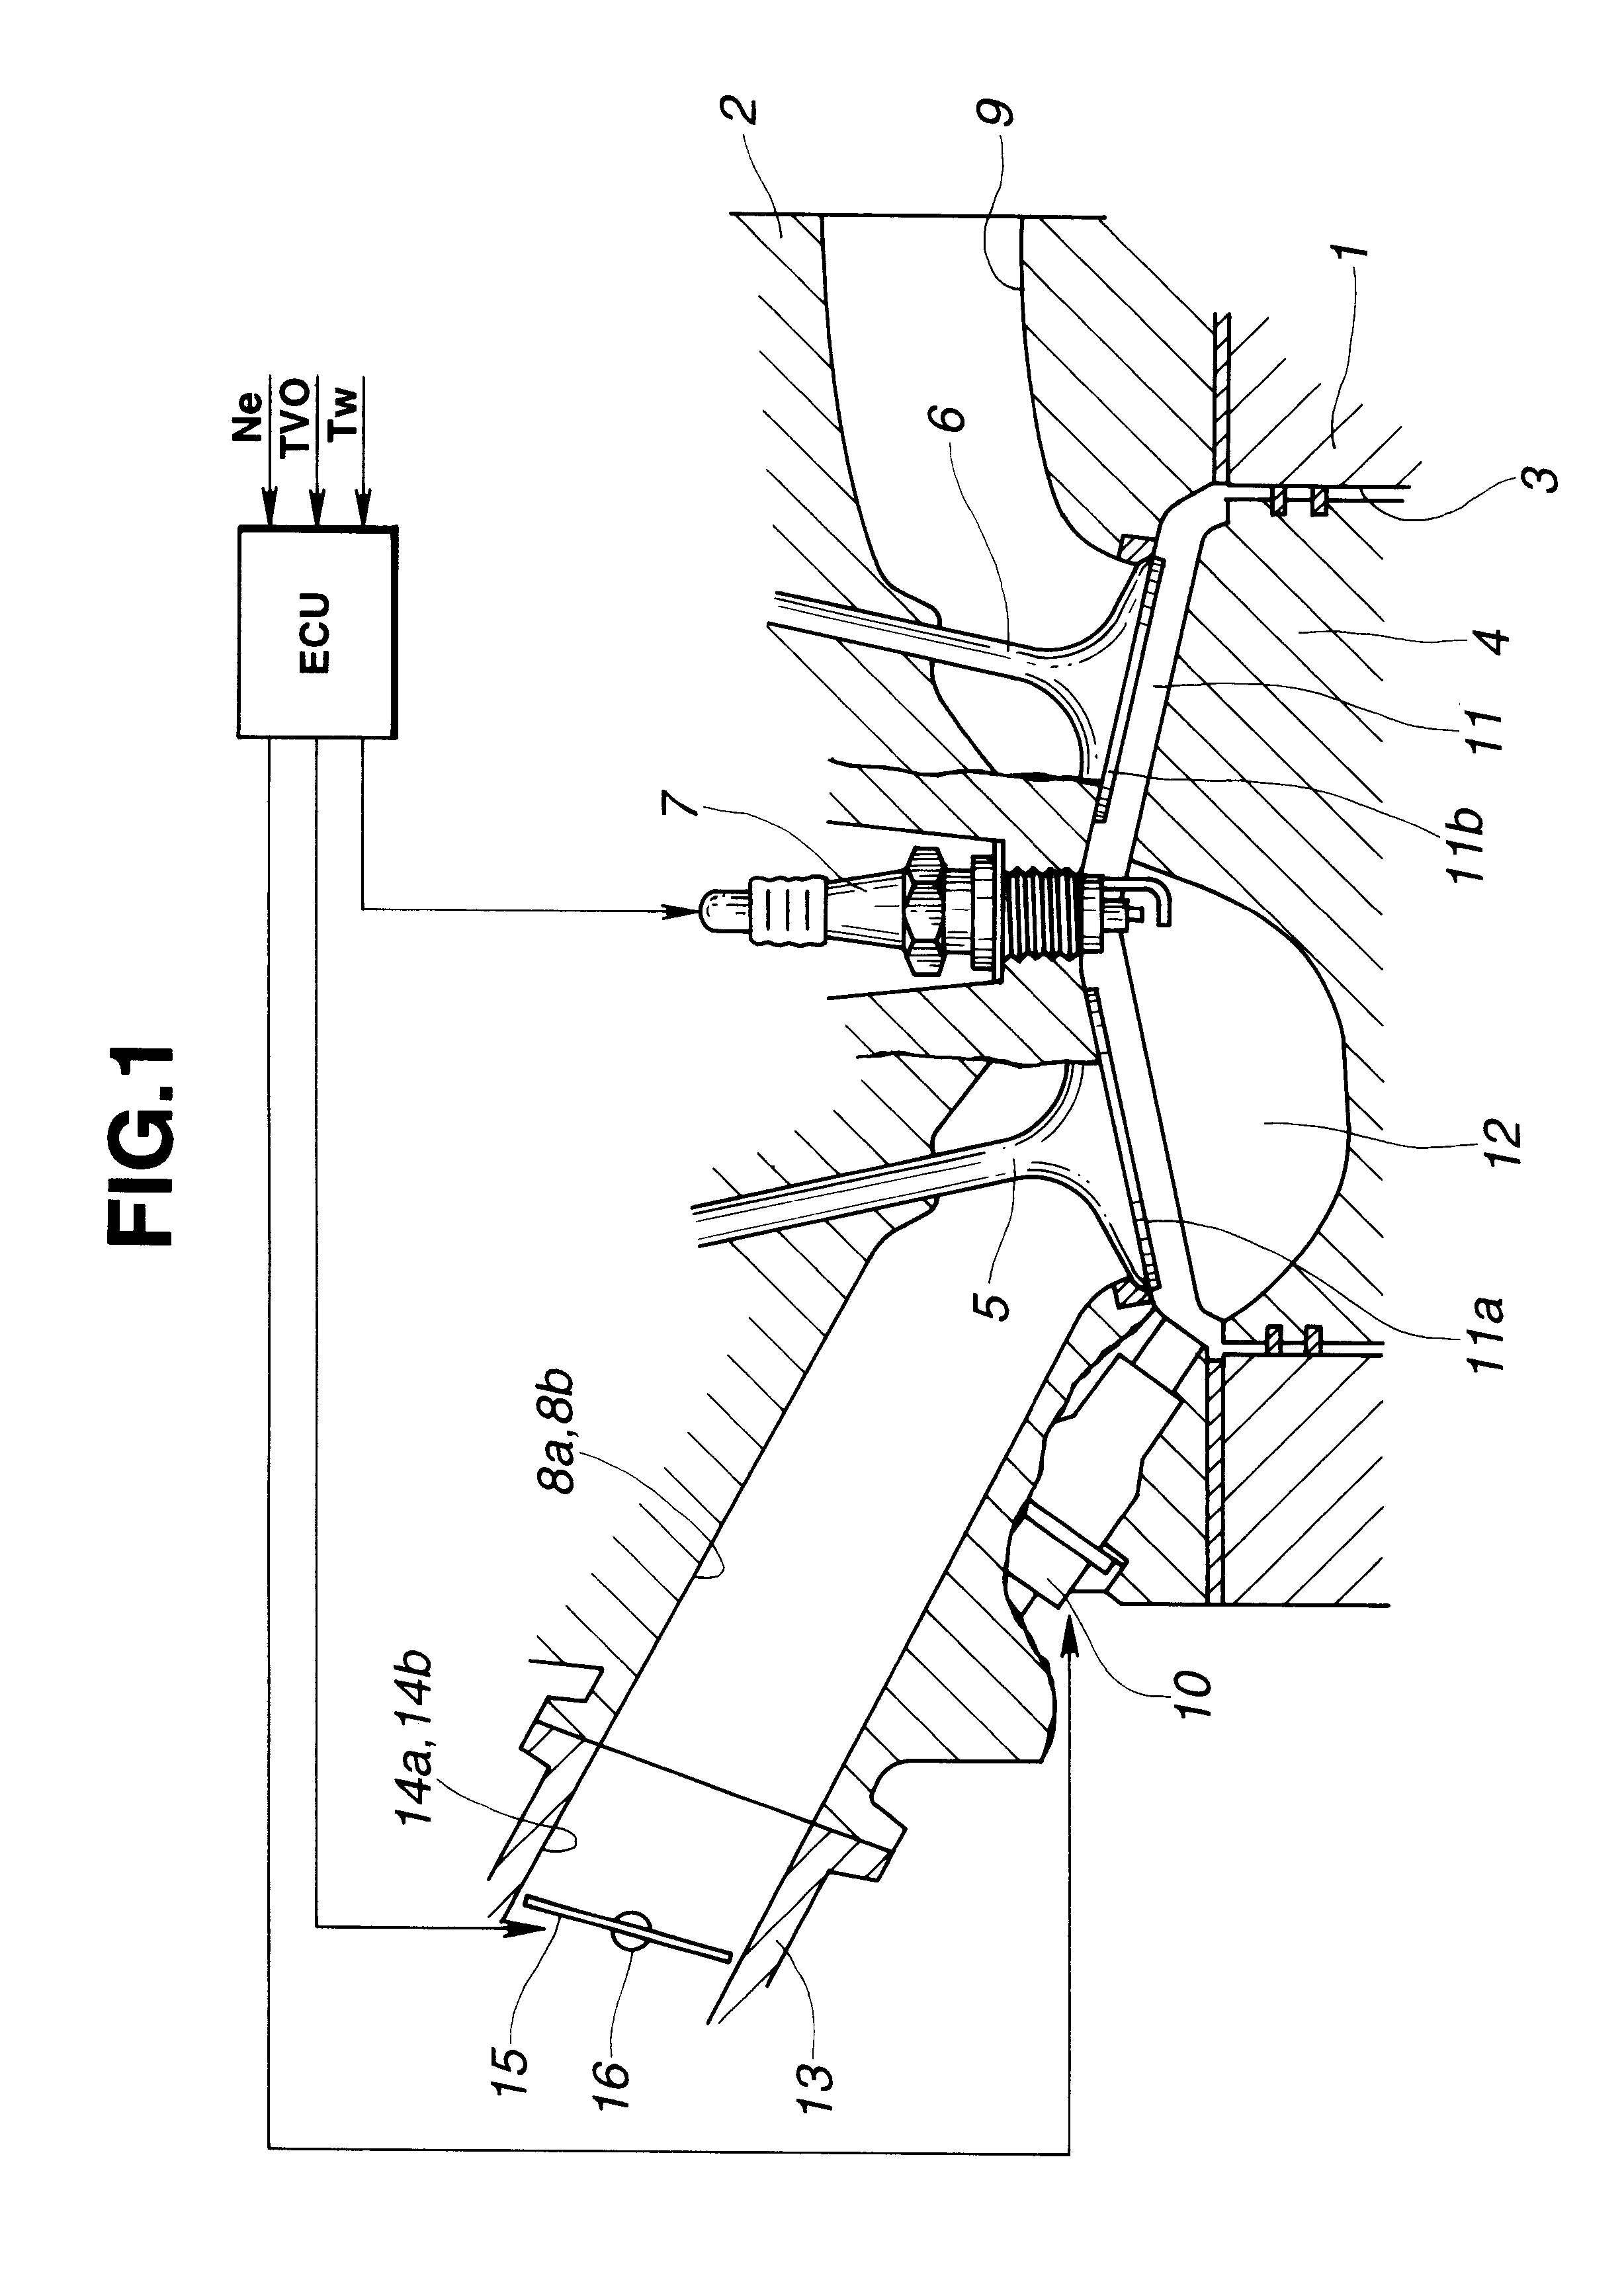 In-cylinder direct-injection spark-ignition engine